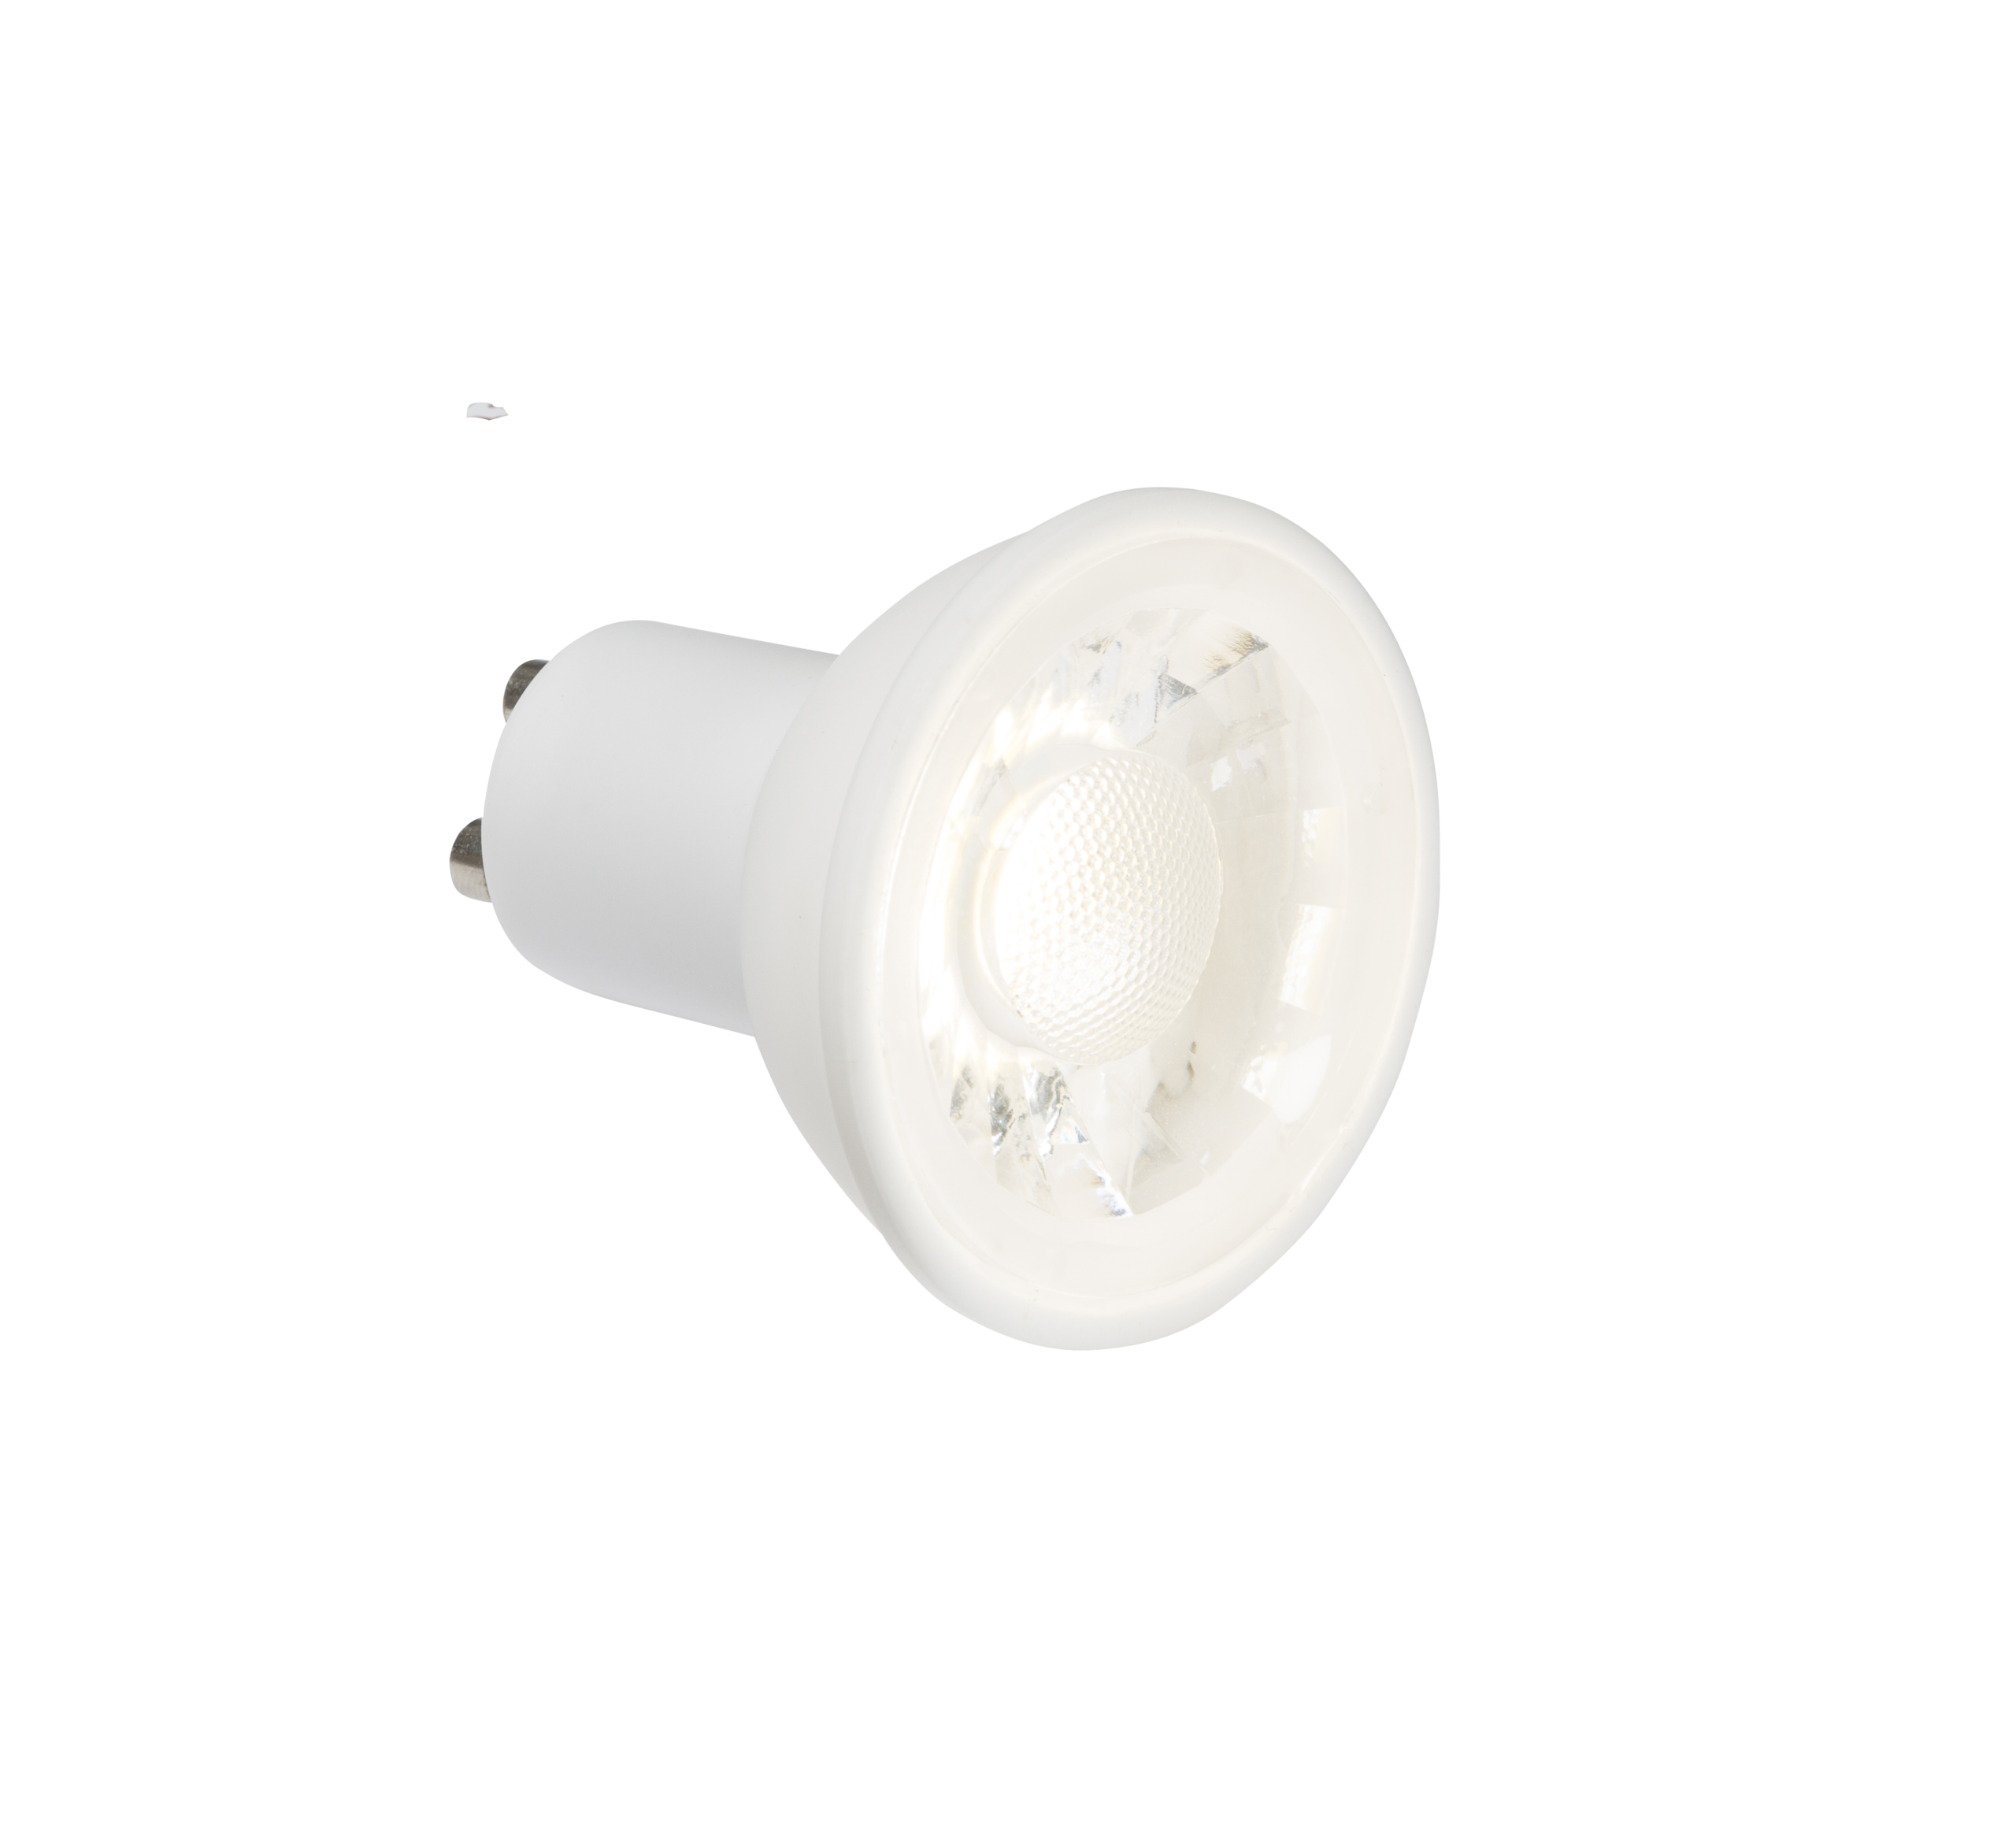 230V 5W GU10 LED COB Cool White 4000K (non-dimmable) - GUCR5CW 